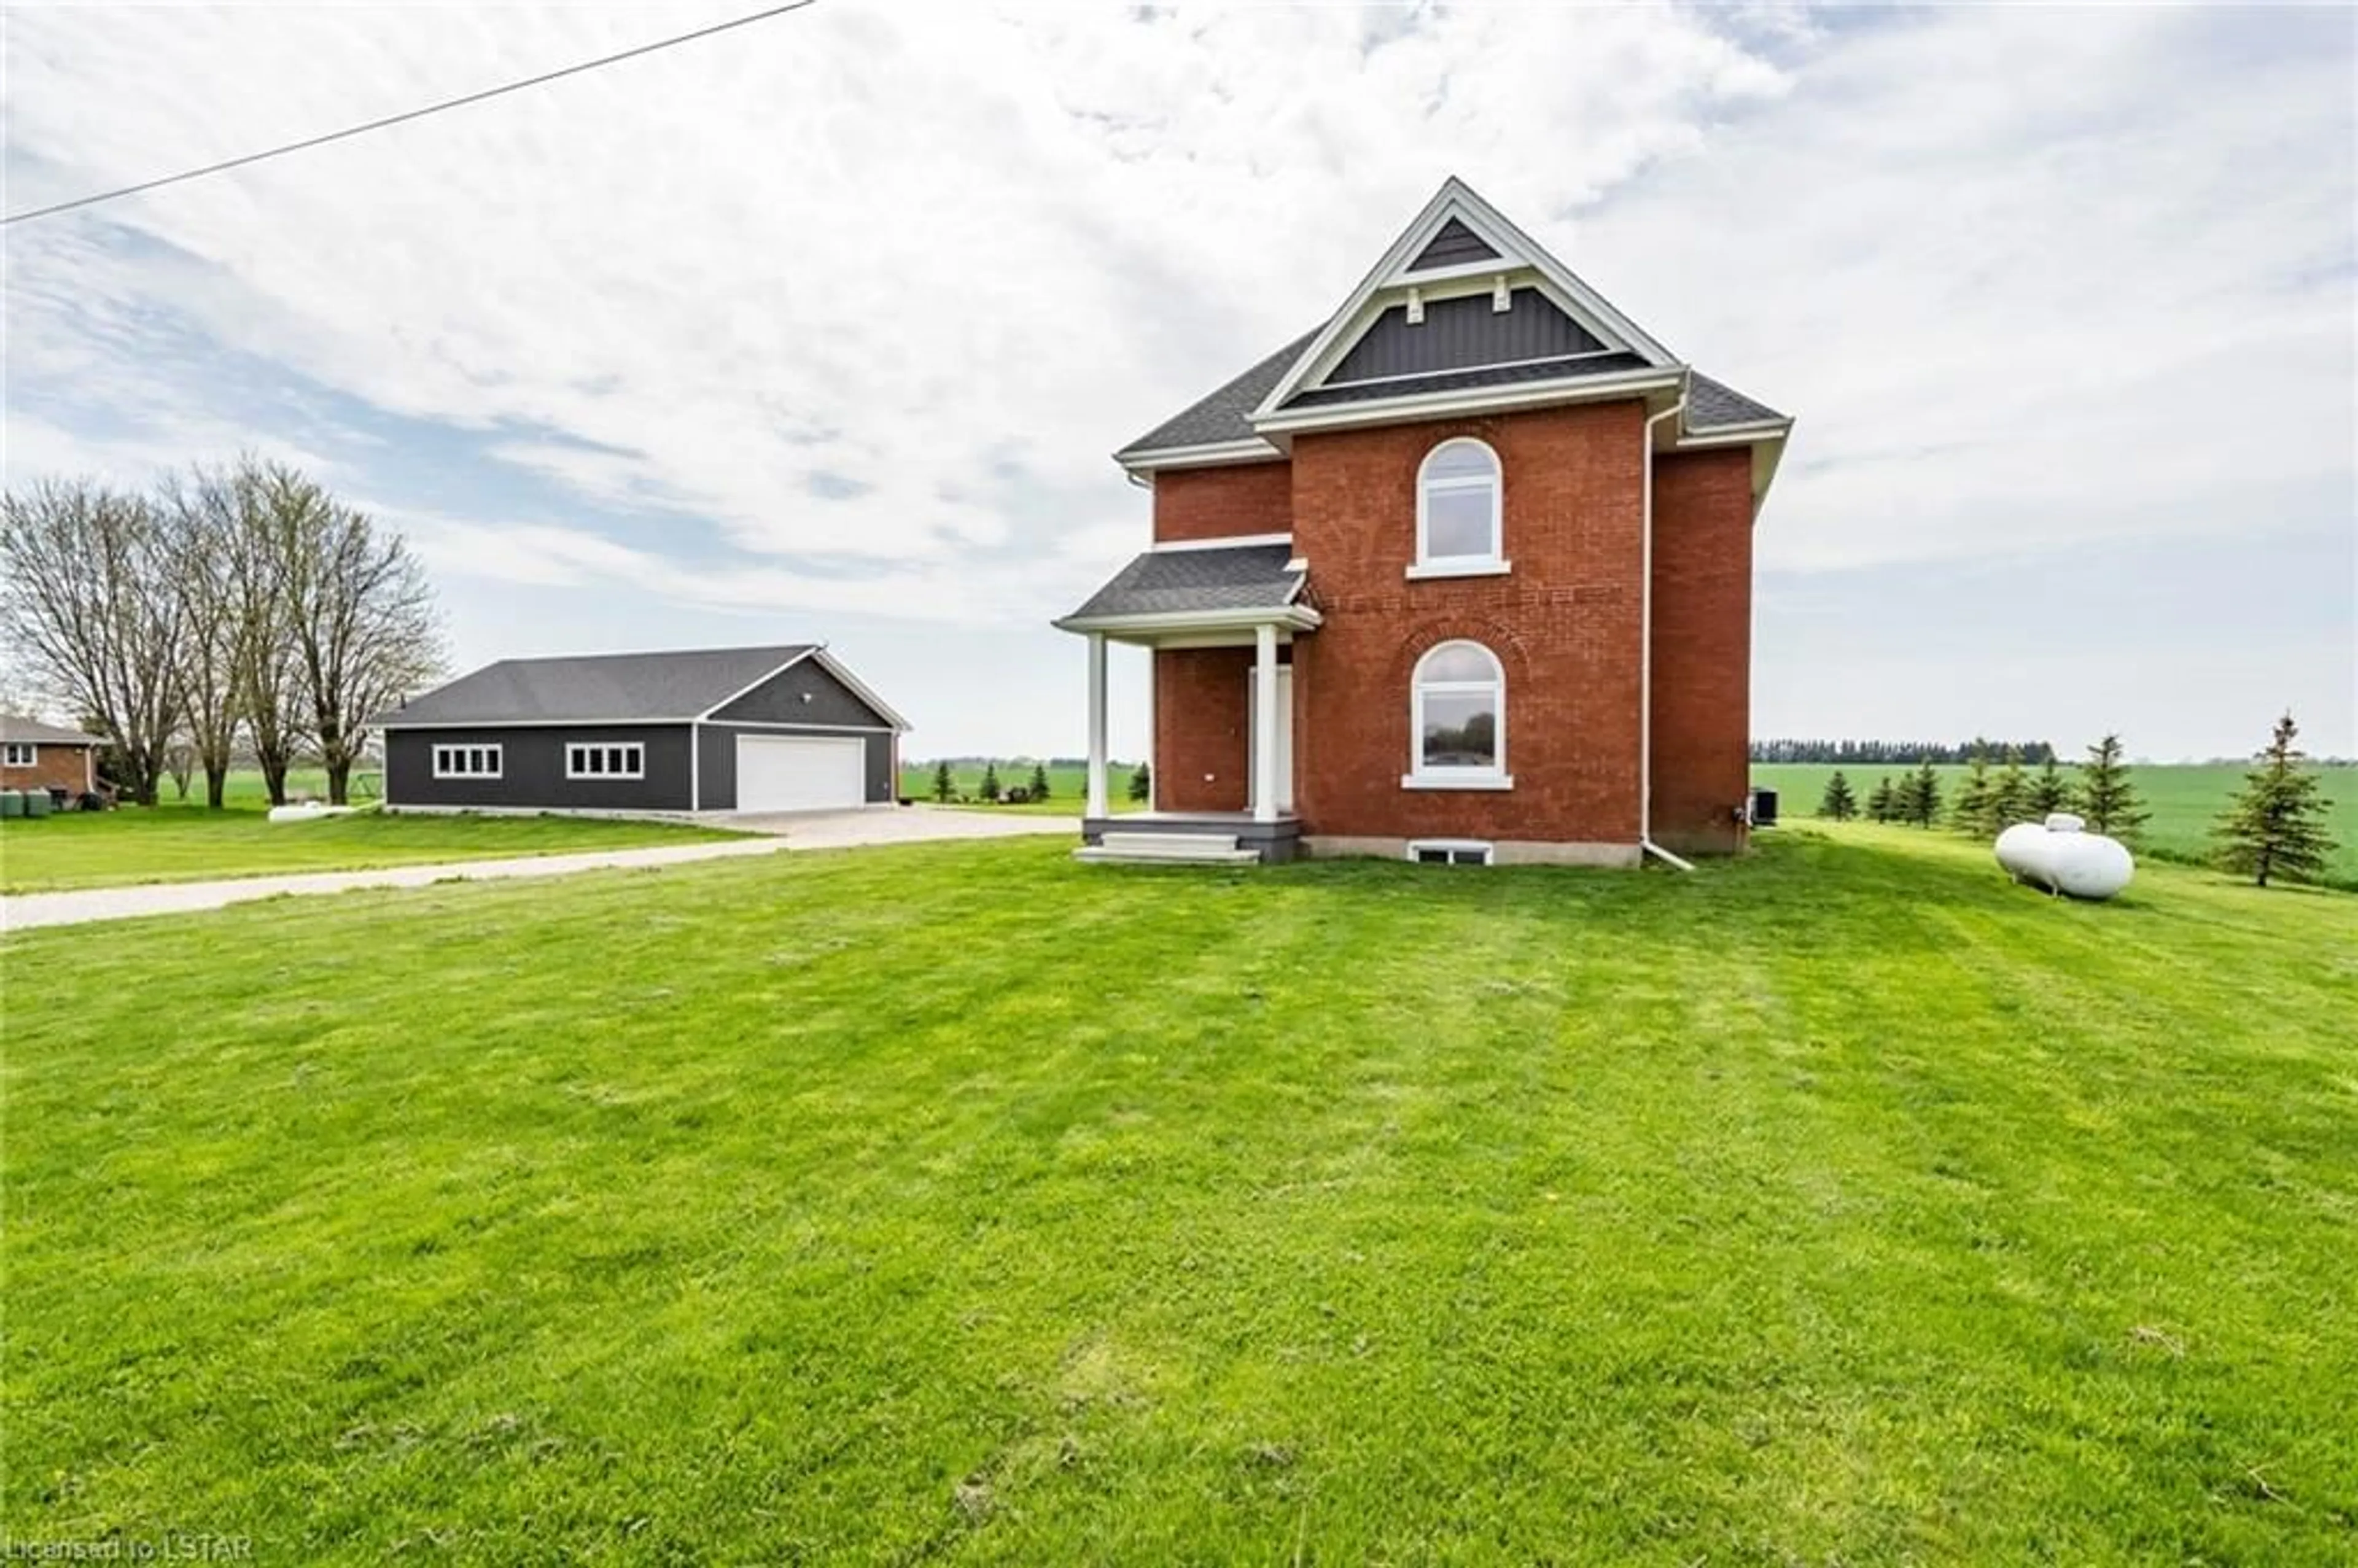 Home with brick exterior material for 21575 Heritage Road Rd, Thorndale Ontario N0M 2P0